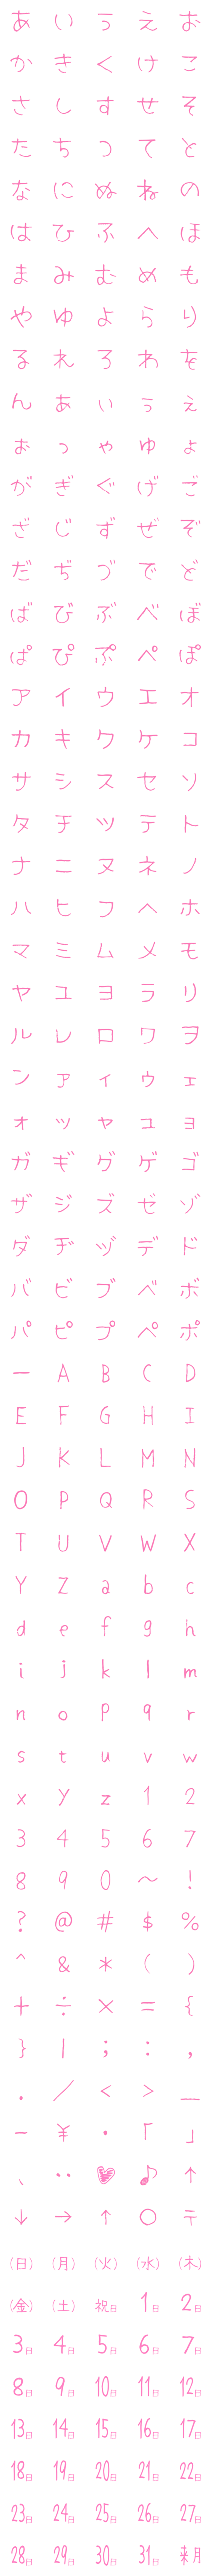 [LINE絵文字]PINK文字 絵文字の画像一覧